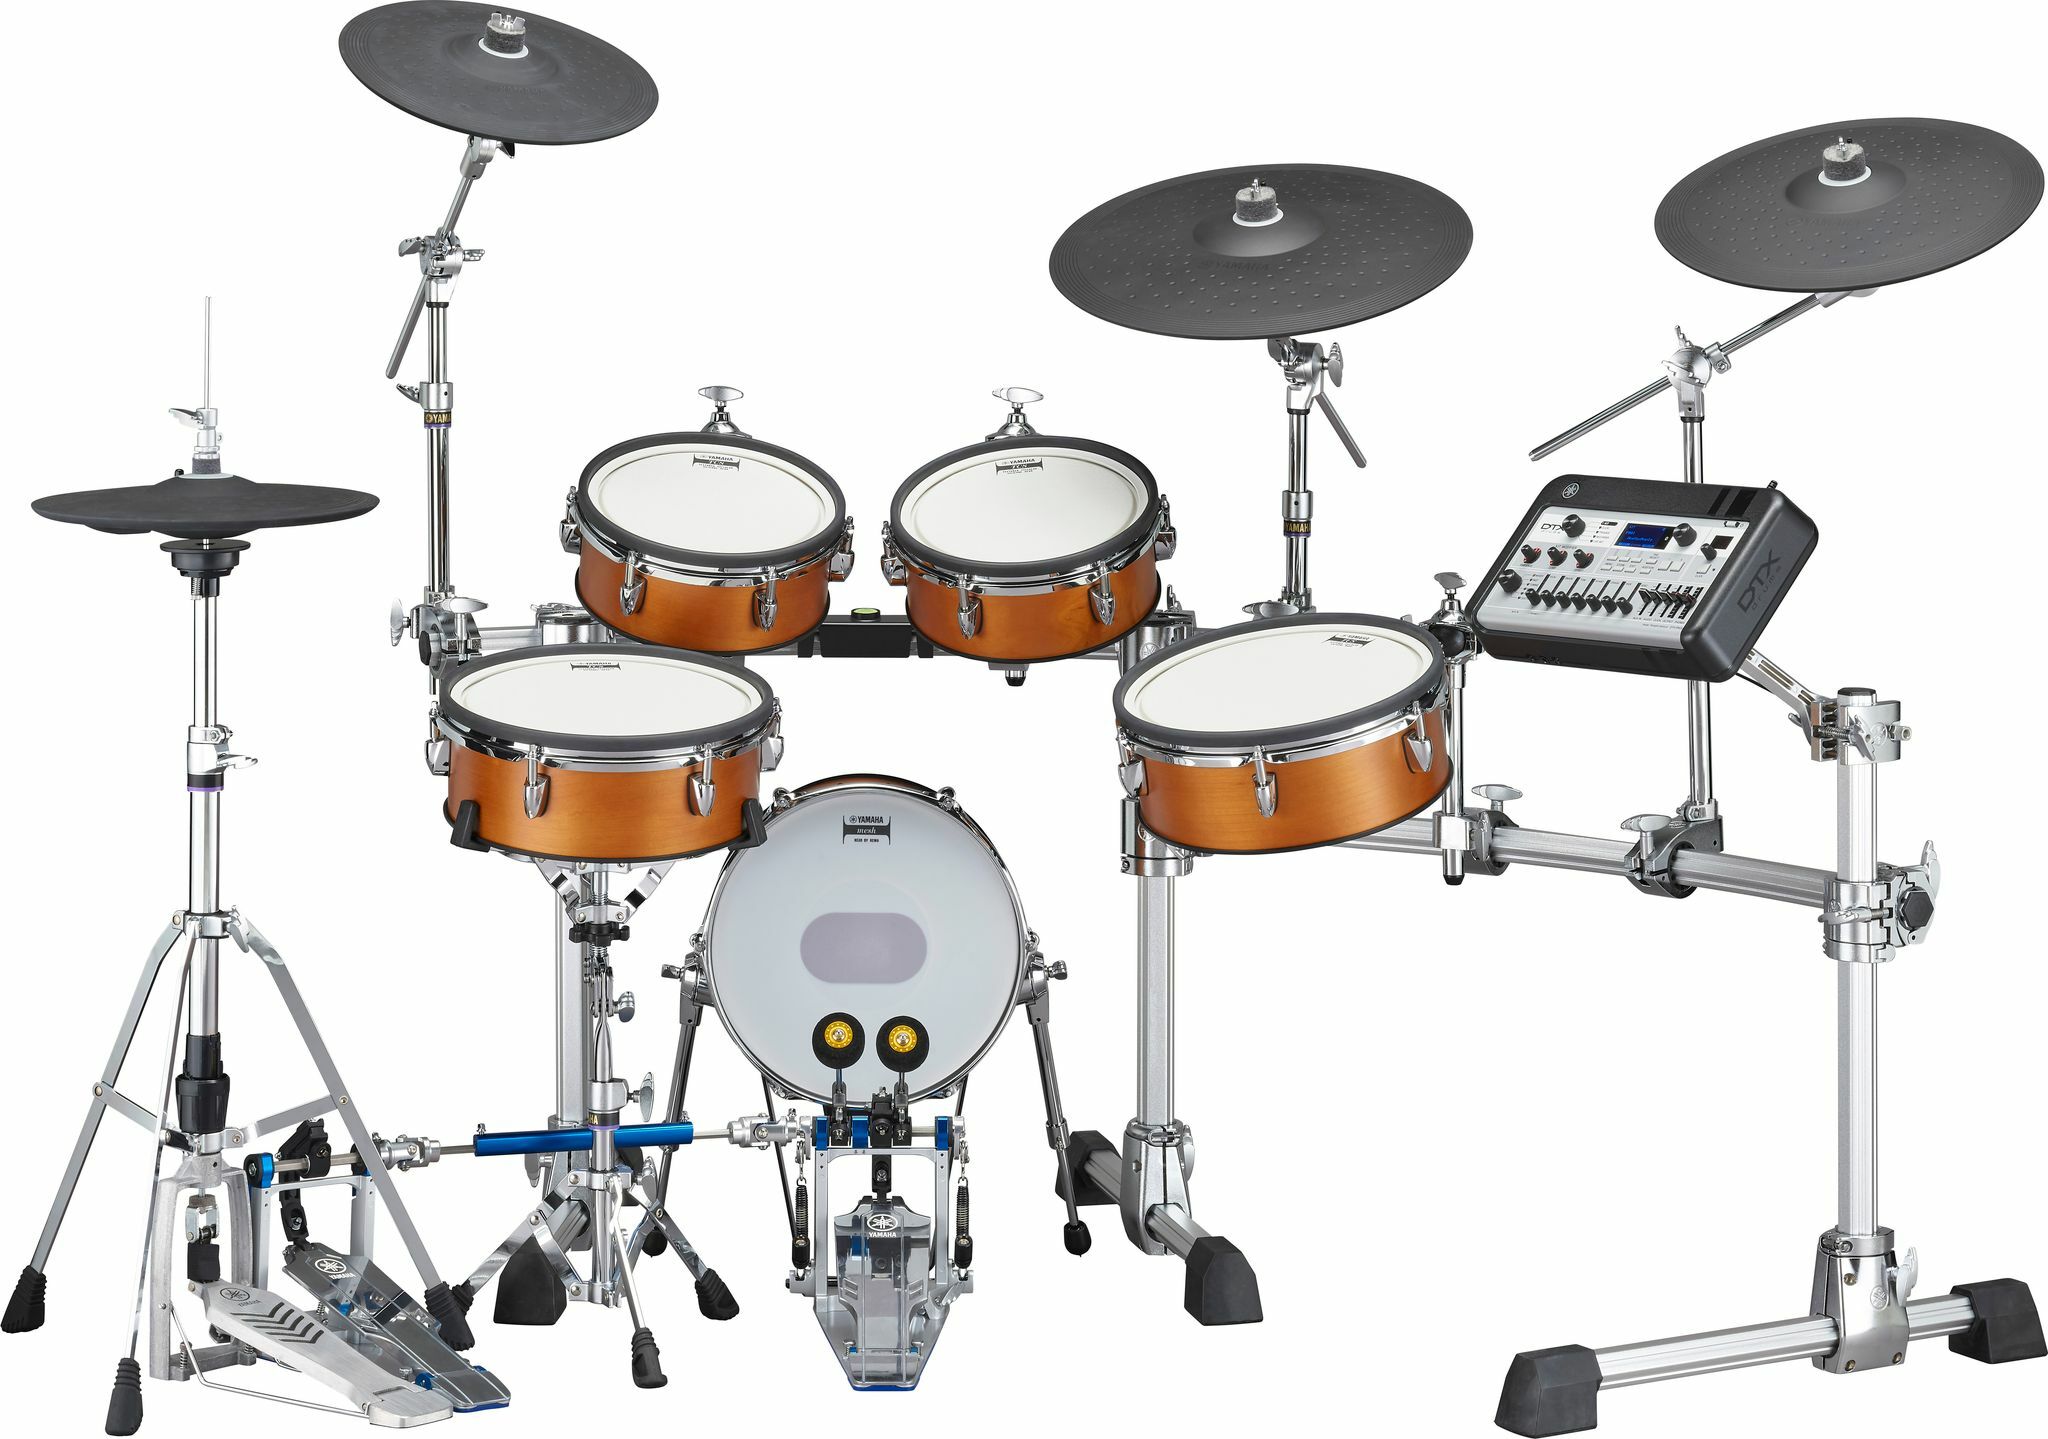 Yamaha Dtx10-kx Electronic Drum Kit Real Wood - Elektronisch drumstel - Main picture